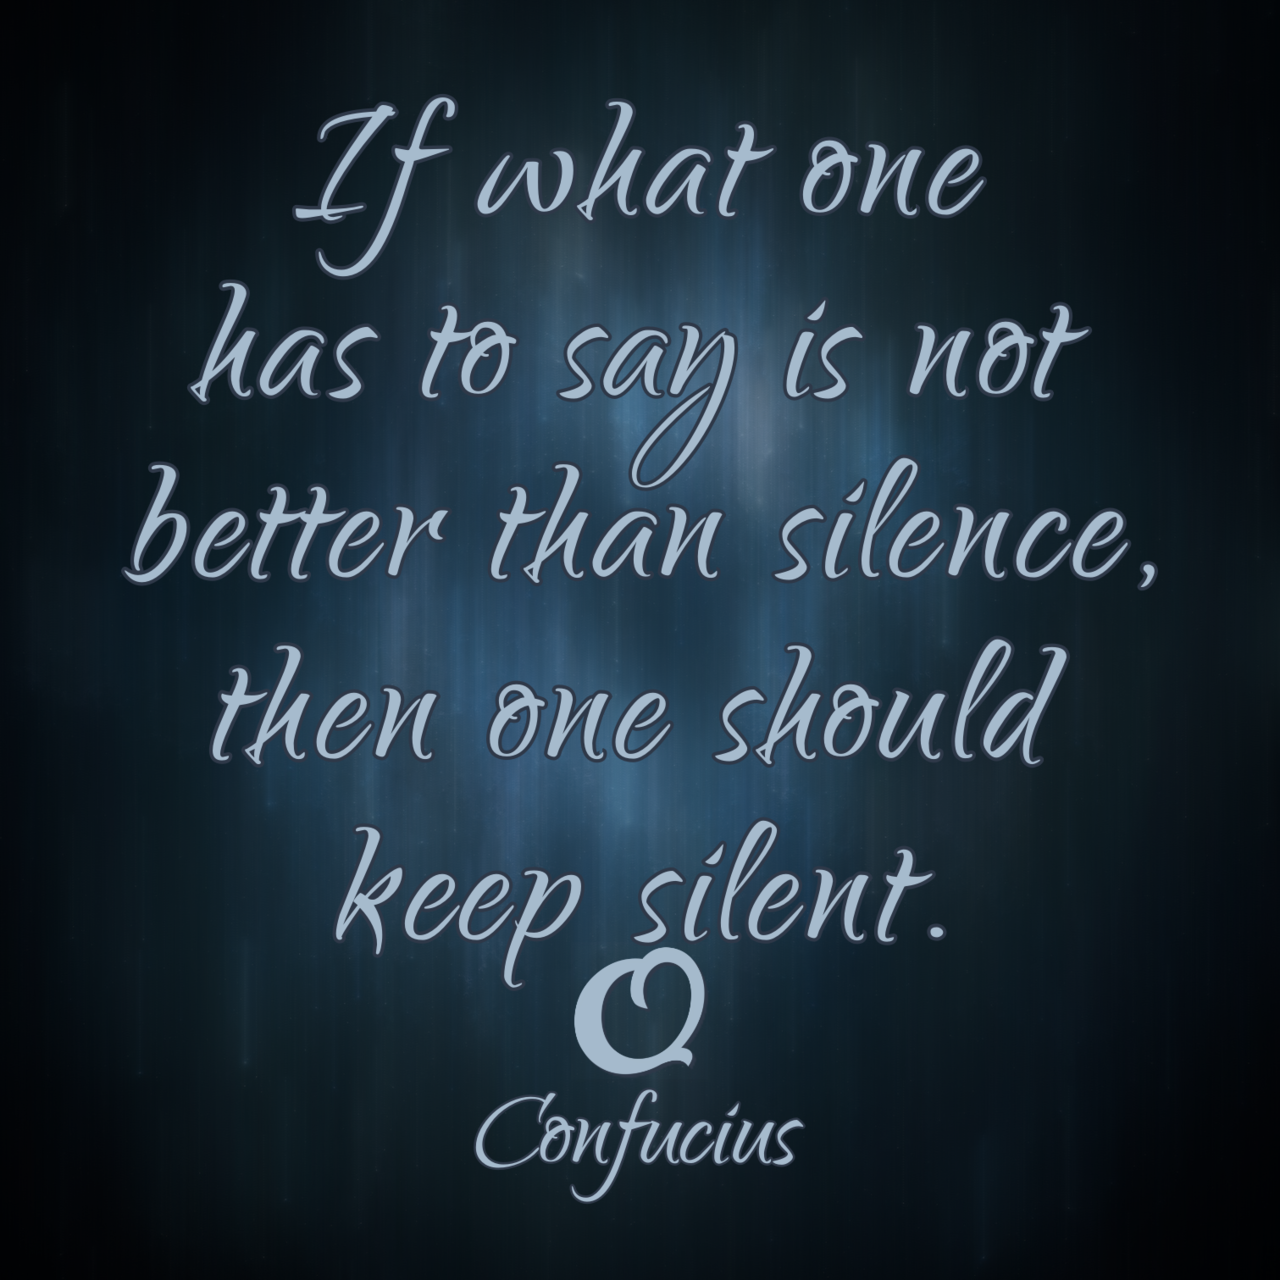 Confucius “If what one has to say is not better than silence, then one should keep silent.”